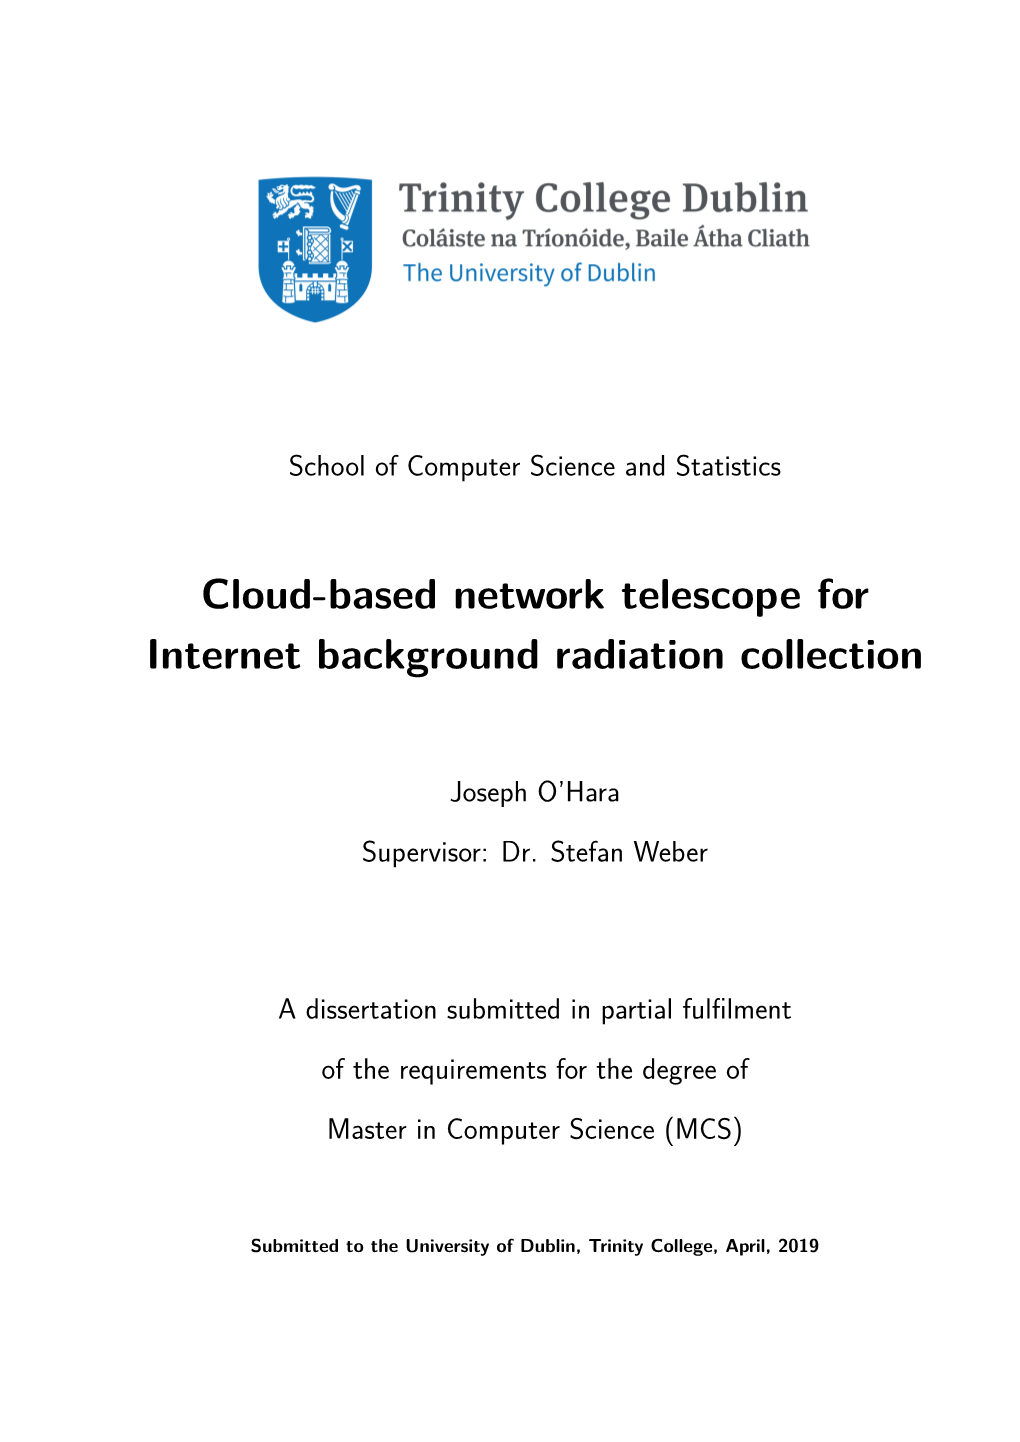 Cloud-Based Network Telescope for Internet Background Radiation Collection